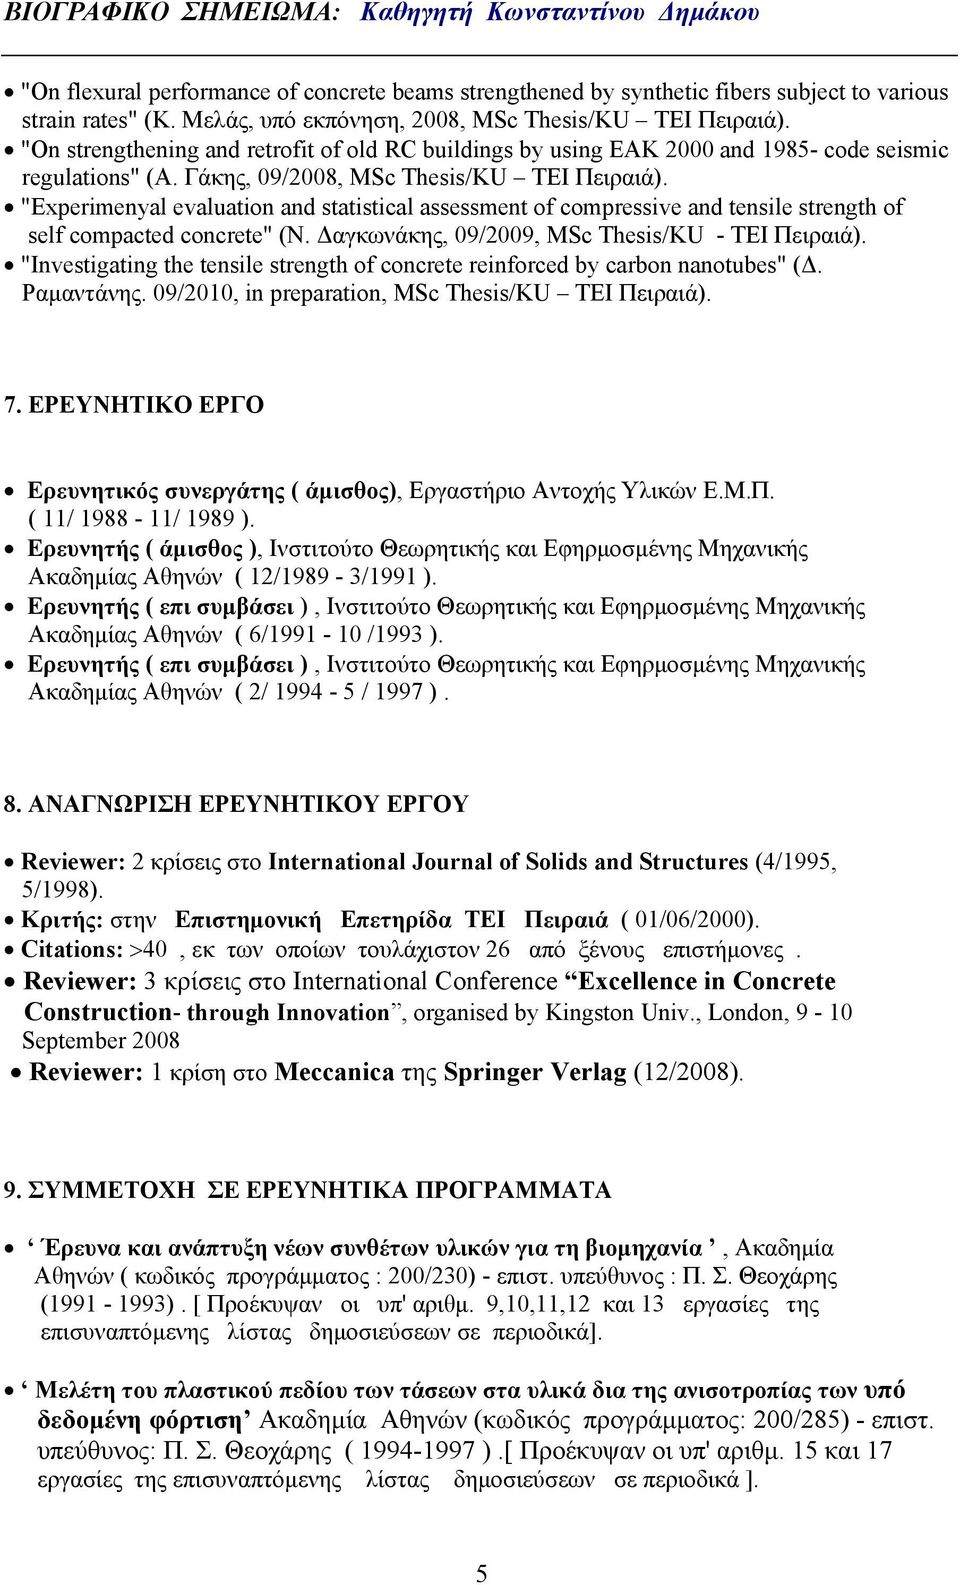 "Experimenyal evaluation and statistical assessment of compressive and tensile strength of self compacted concrete" (Ν. Δαγκωνάκης, 09/2009, MSc Thesis/KU - ΤΕΙ Πειραιά).